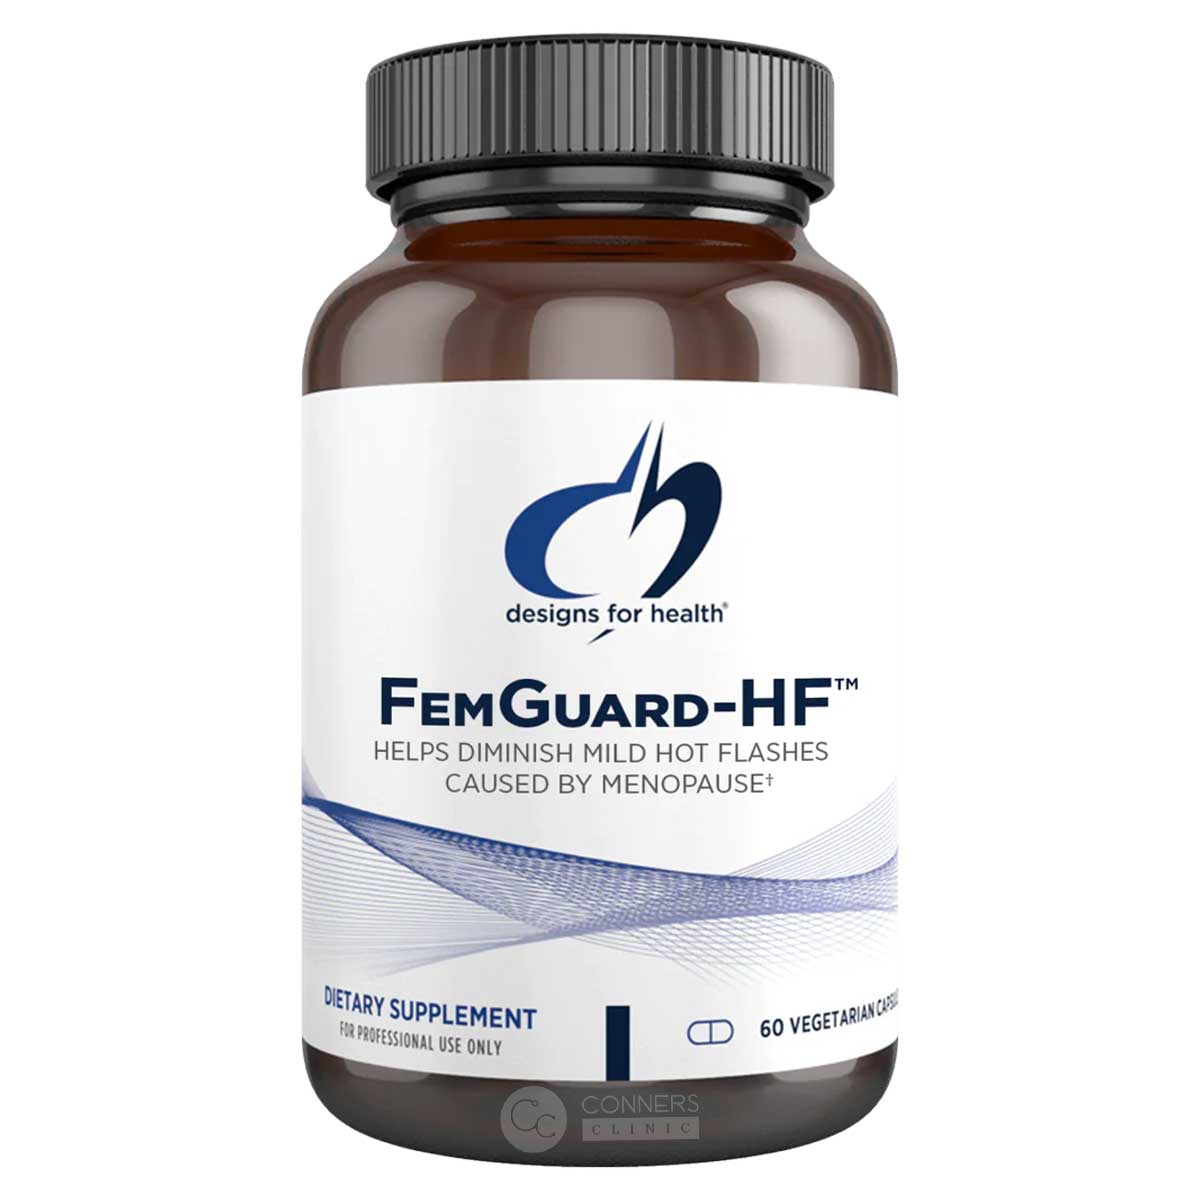 FemGuard-HF Designs for Health Supplement - Conners Clinic